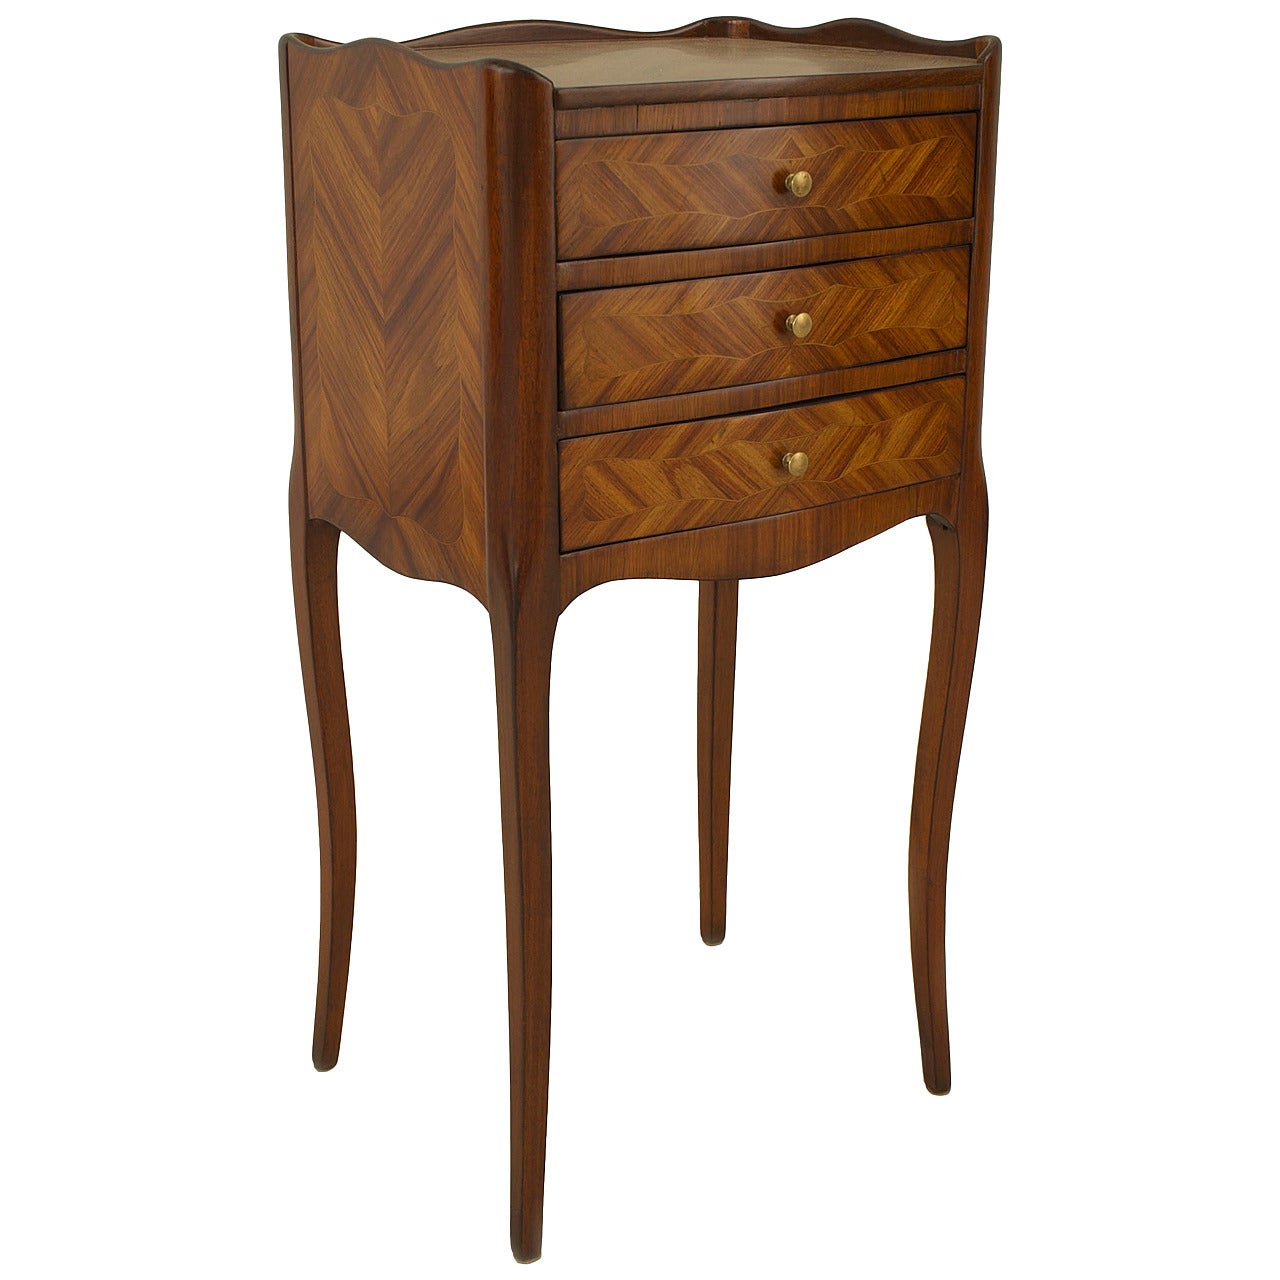 French Louis XV Style Tulipwood Veneer Bedside Table For Sale